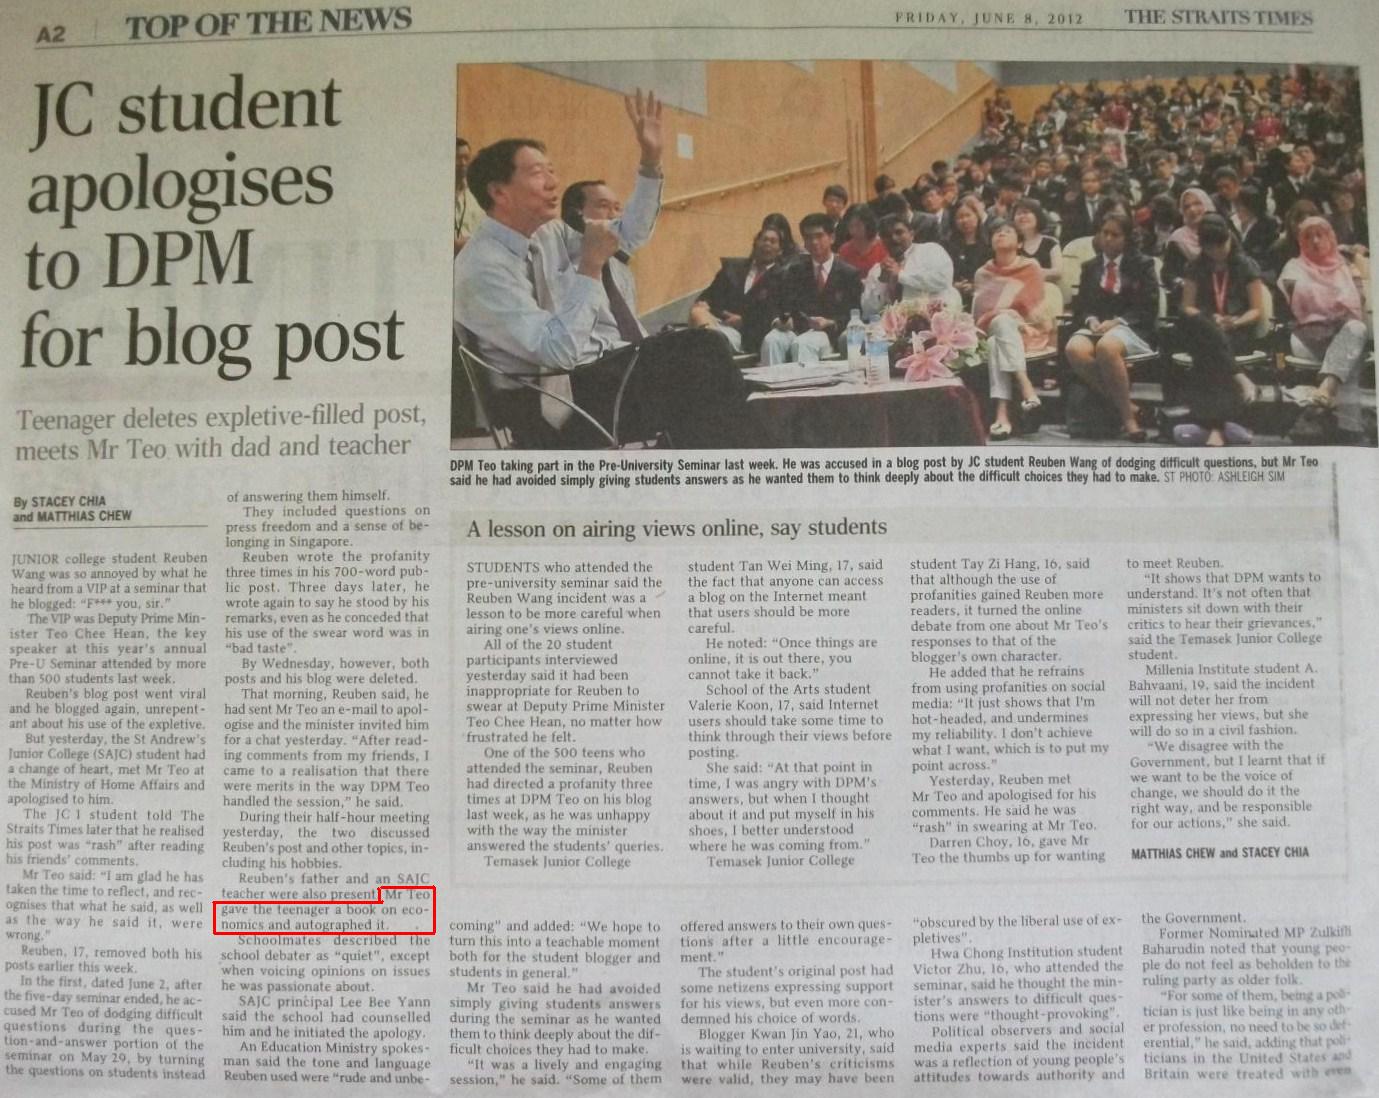 JC+student+apologises+to+DPM+for+blog+post,+%28HL+econs%29.JPG